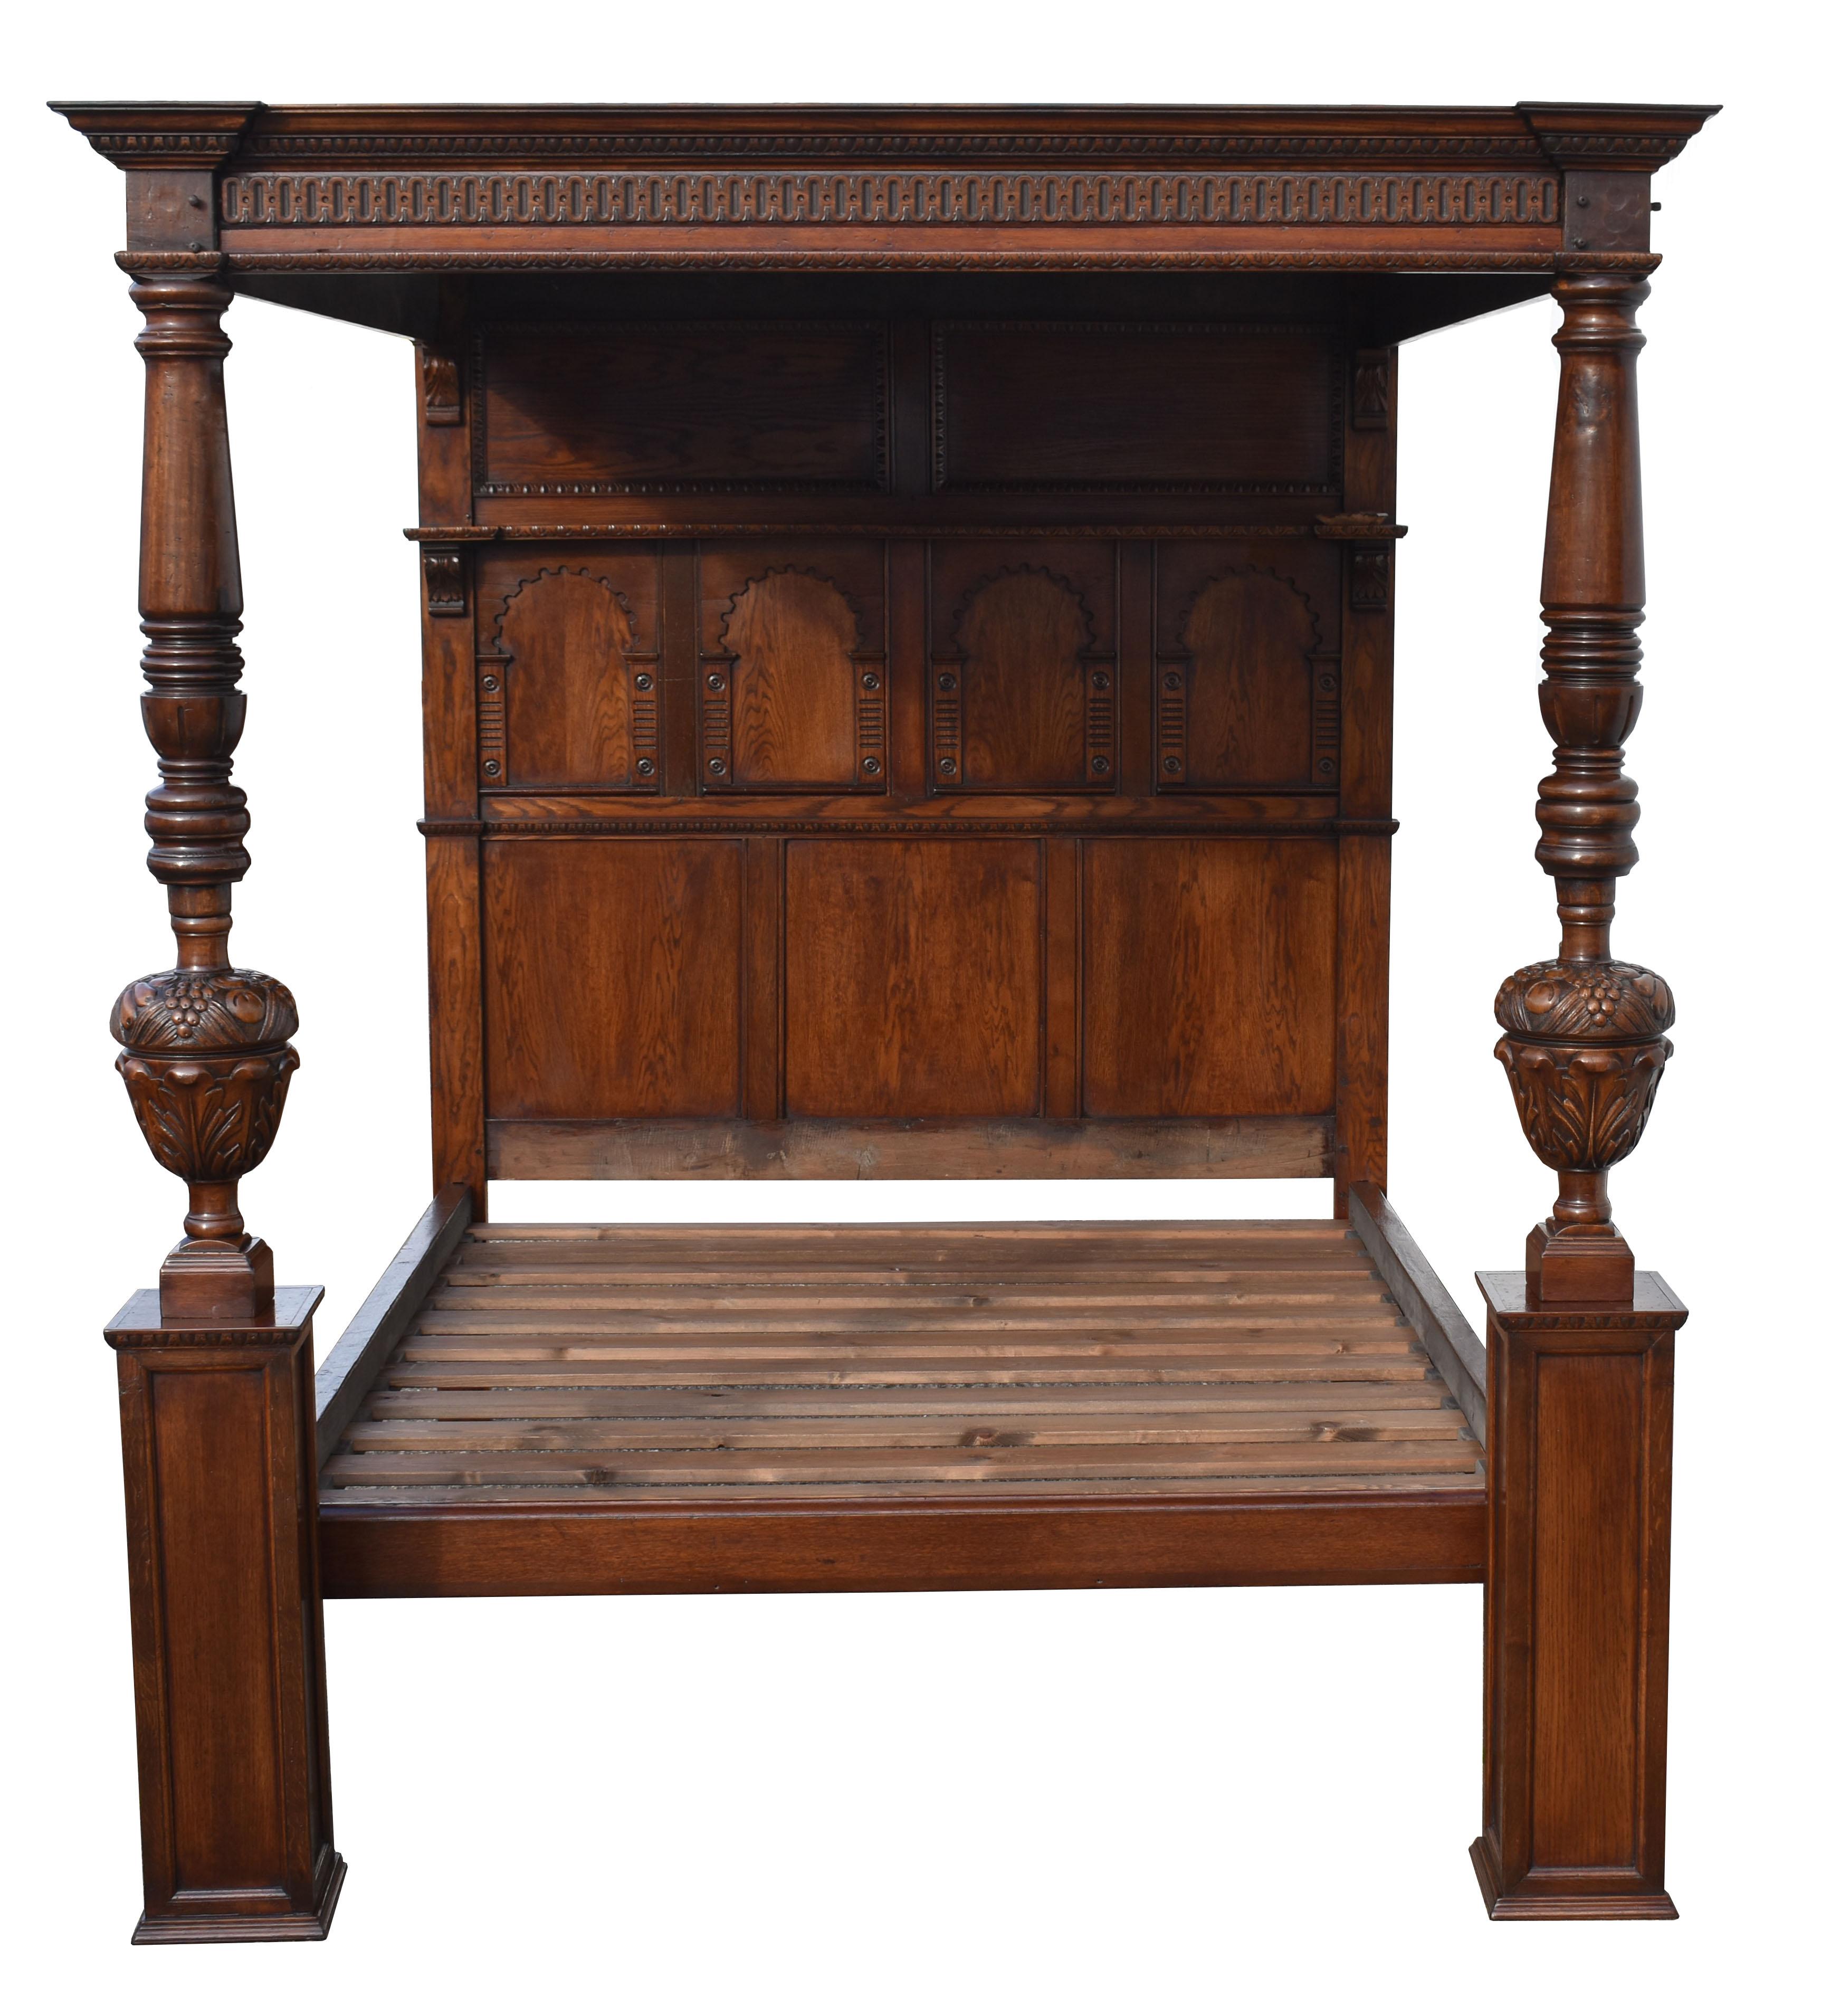 For sale is an Elizabethan style carved oak four poster bed. Having a carved and moulded cornice enclosing a paneled canopy. The headboard has four arched panels with panels above and below. The canopy is supported by two turned and carved columns